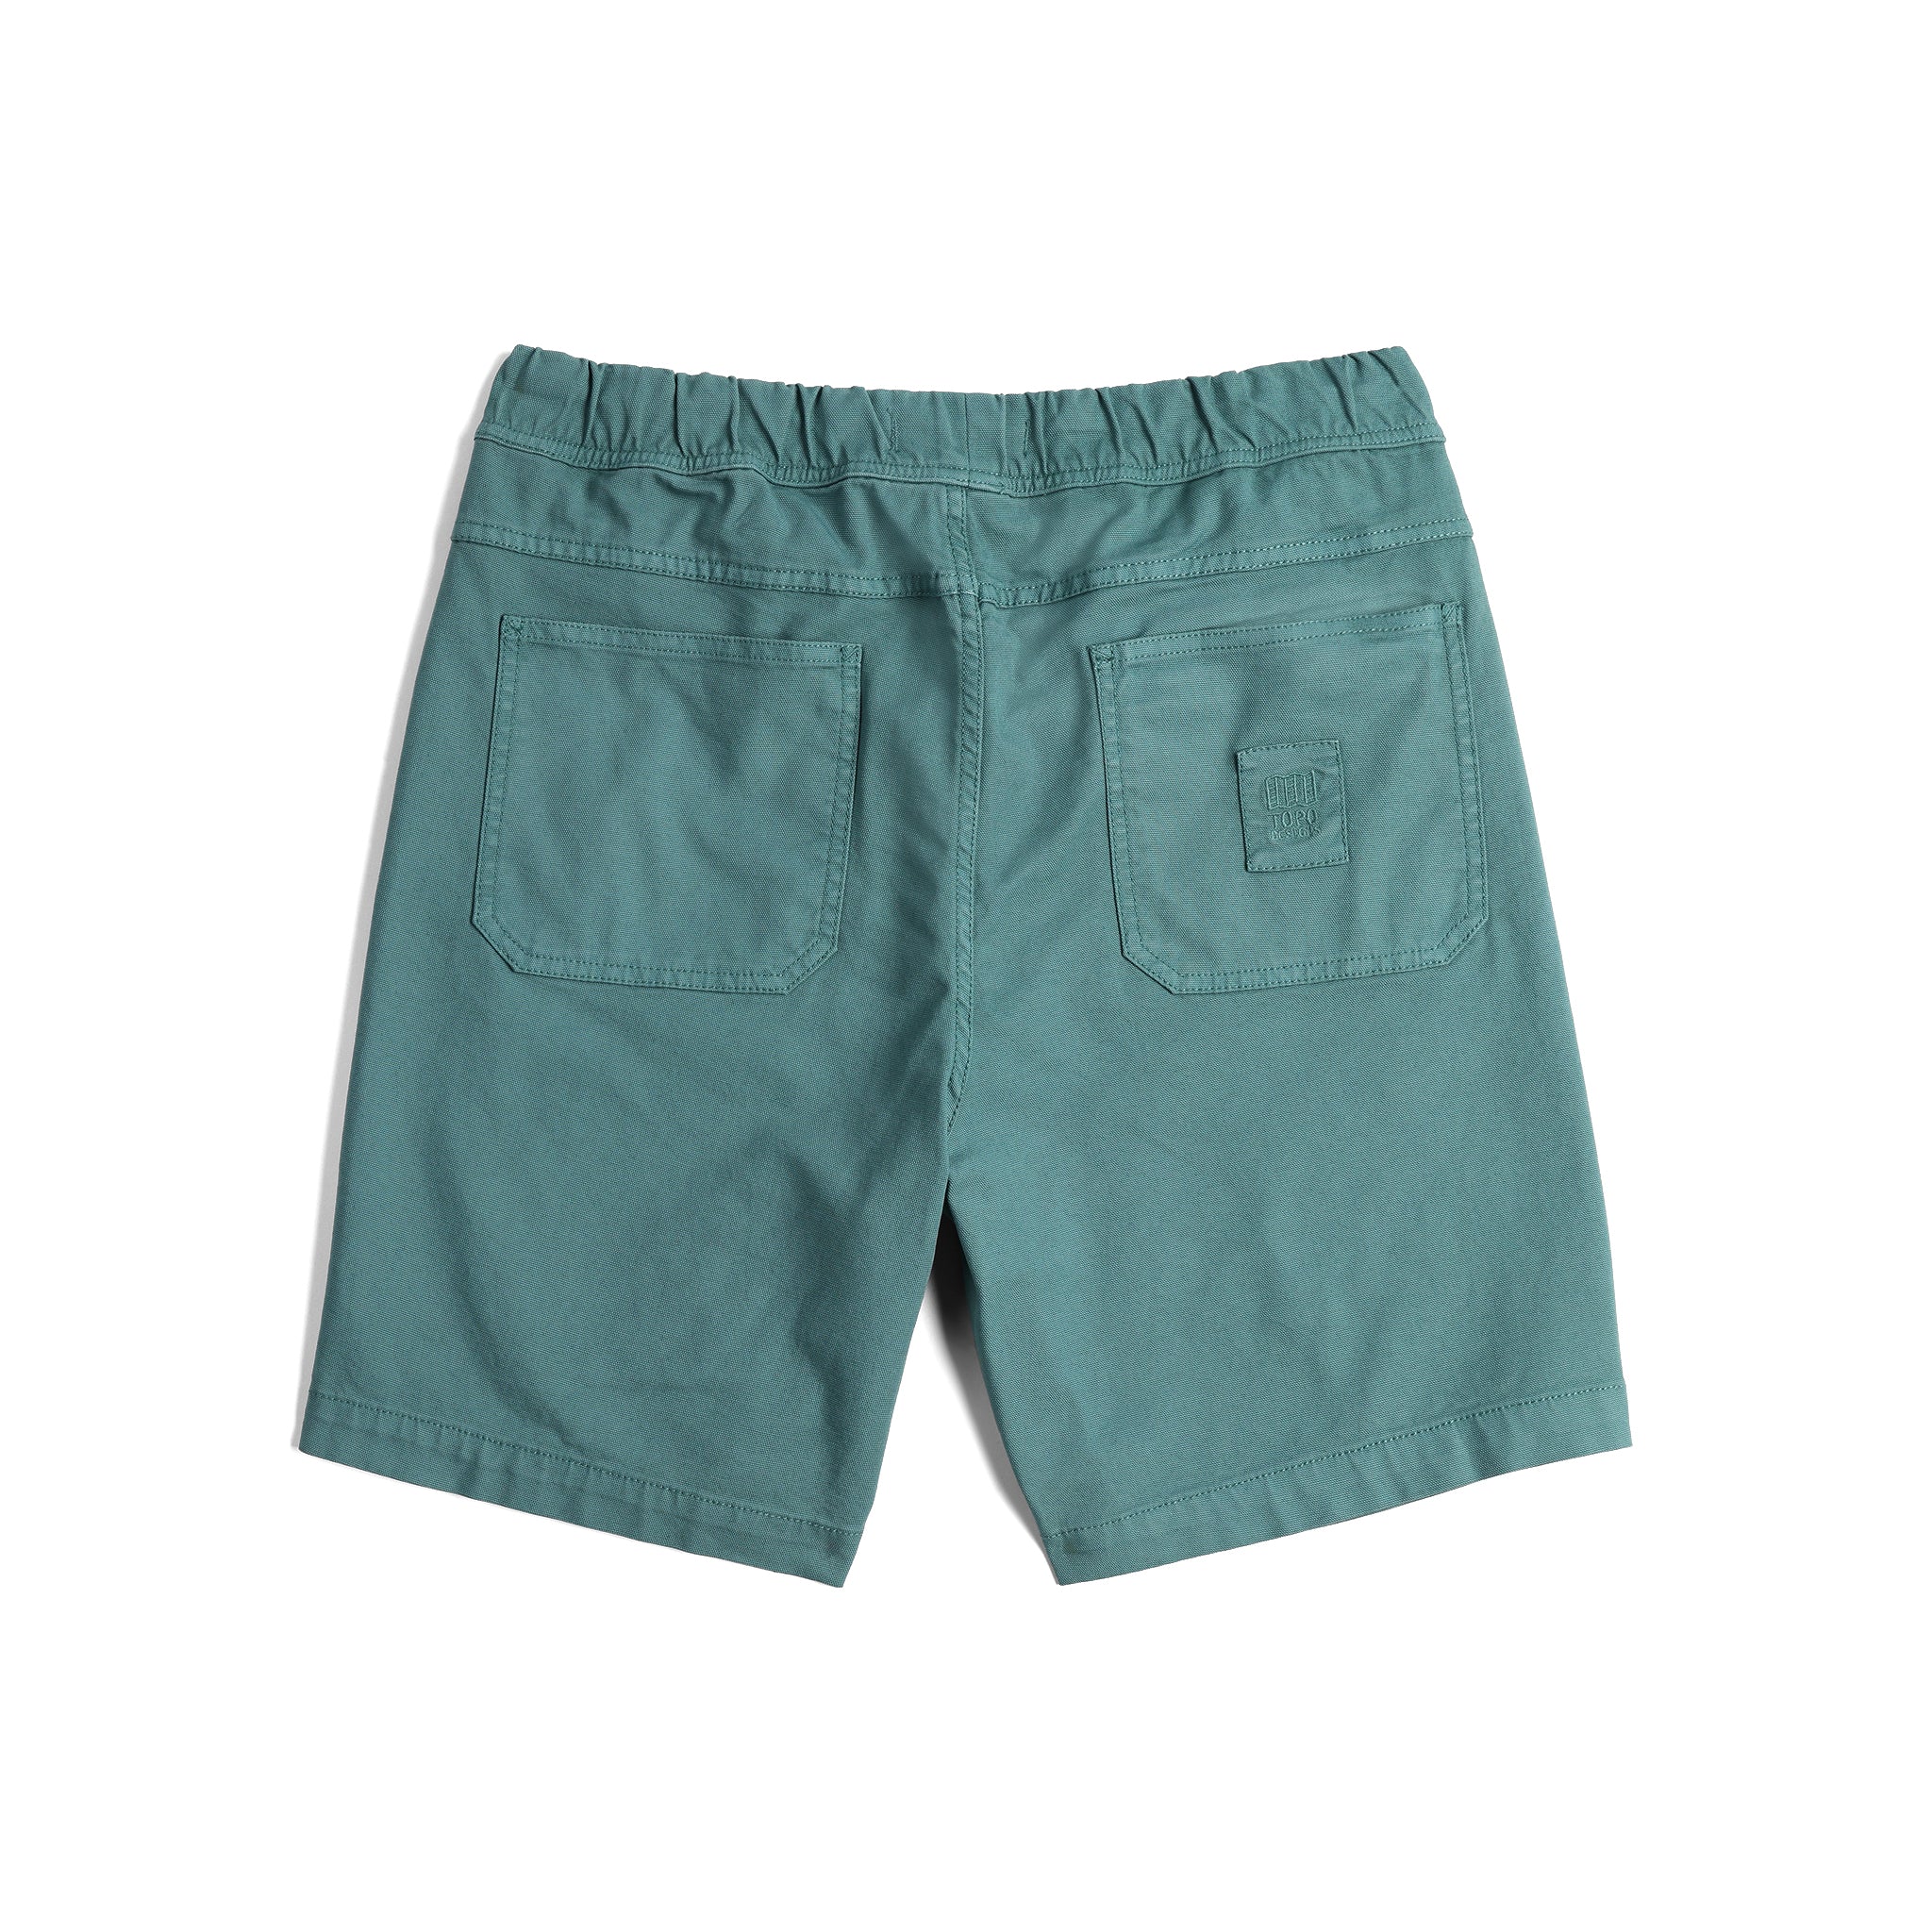 Back View of Topo Designs Dirt Shorts - Men's in "Sea Pine"